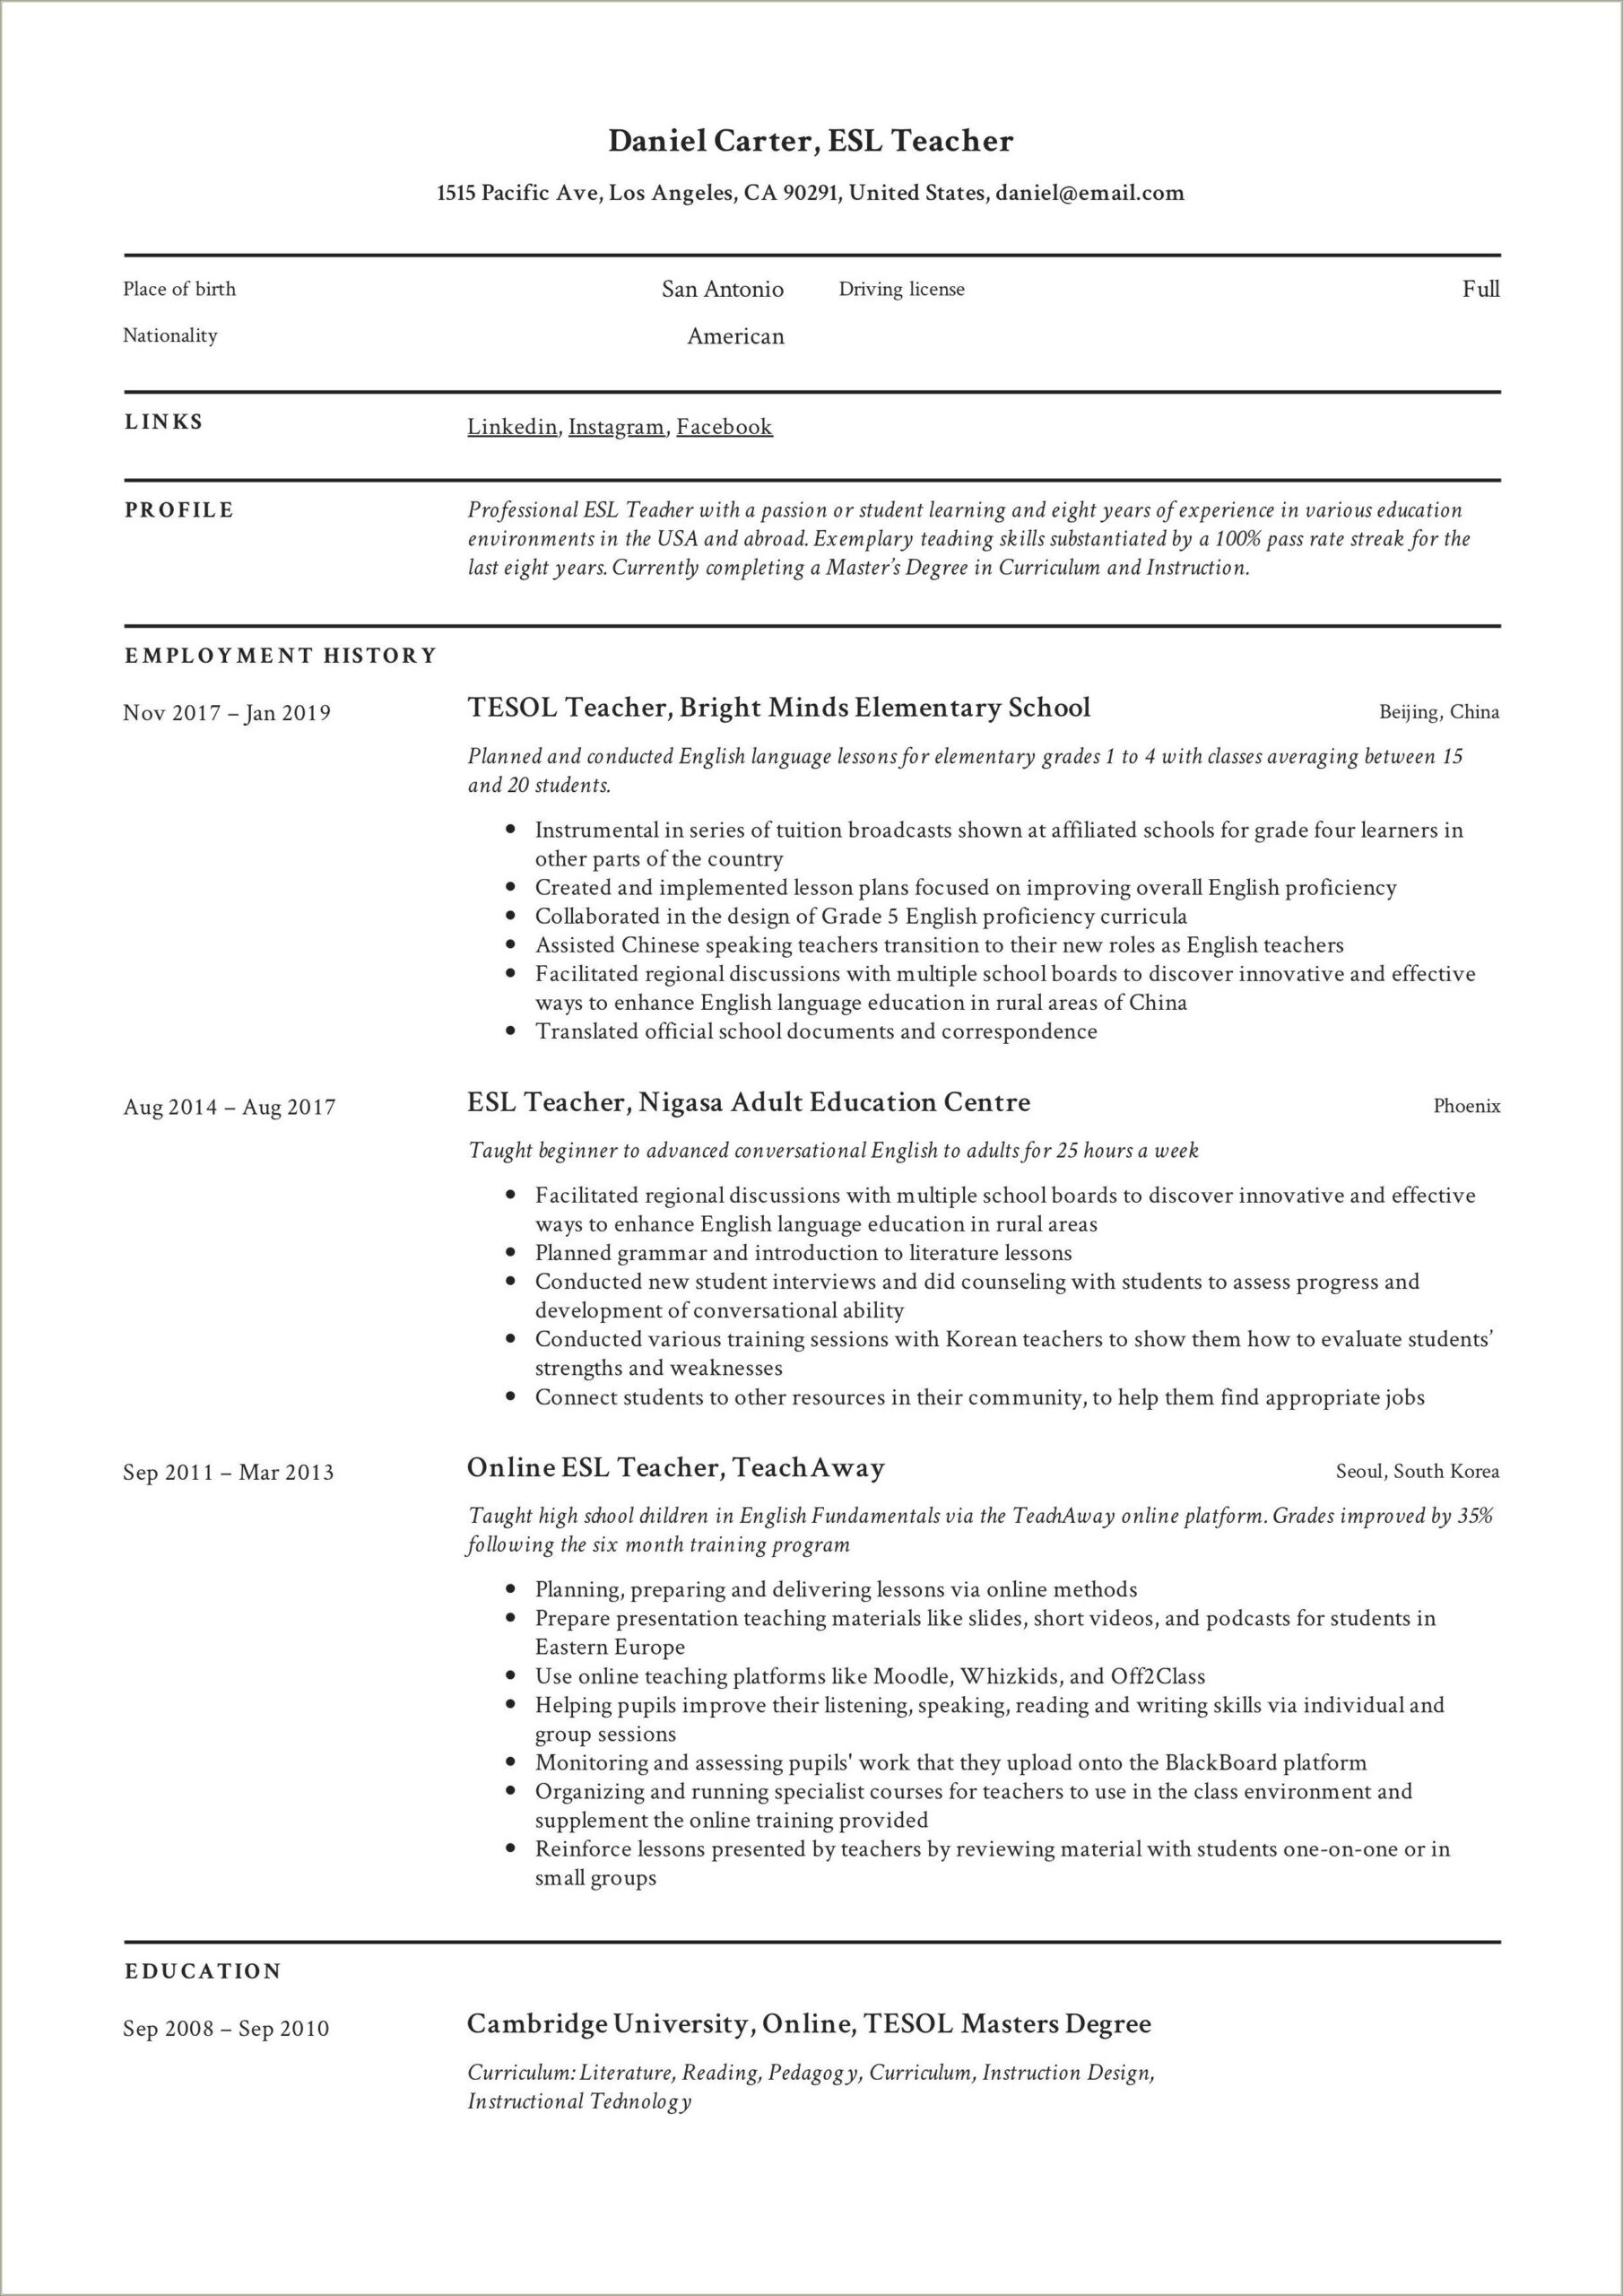 Application Resume Doesn't Match Work History Facebook